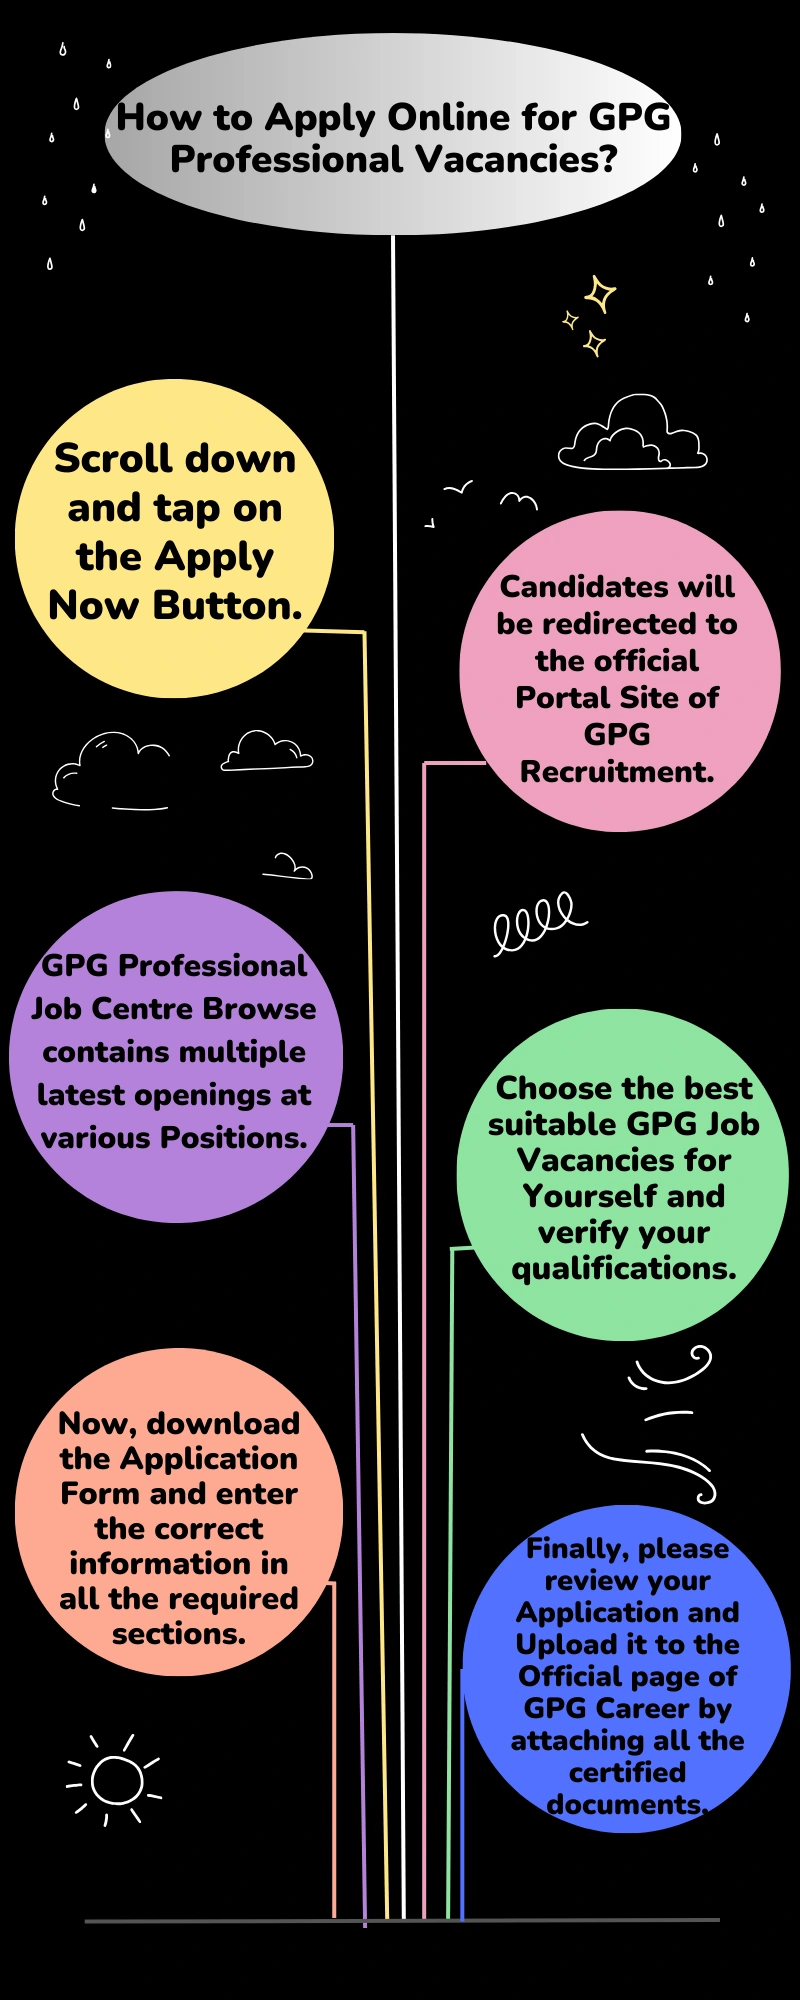 How to Apply Online for GPG Professional Vacancies?